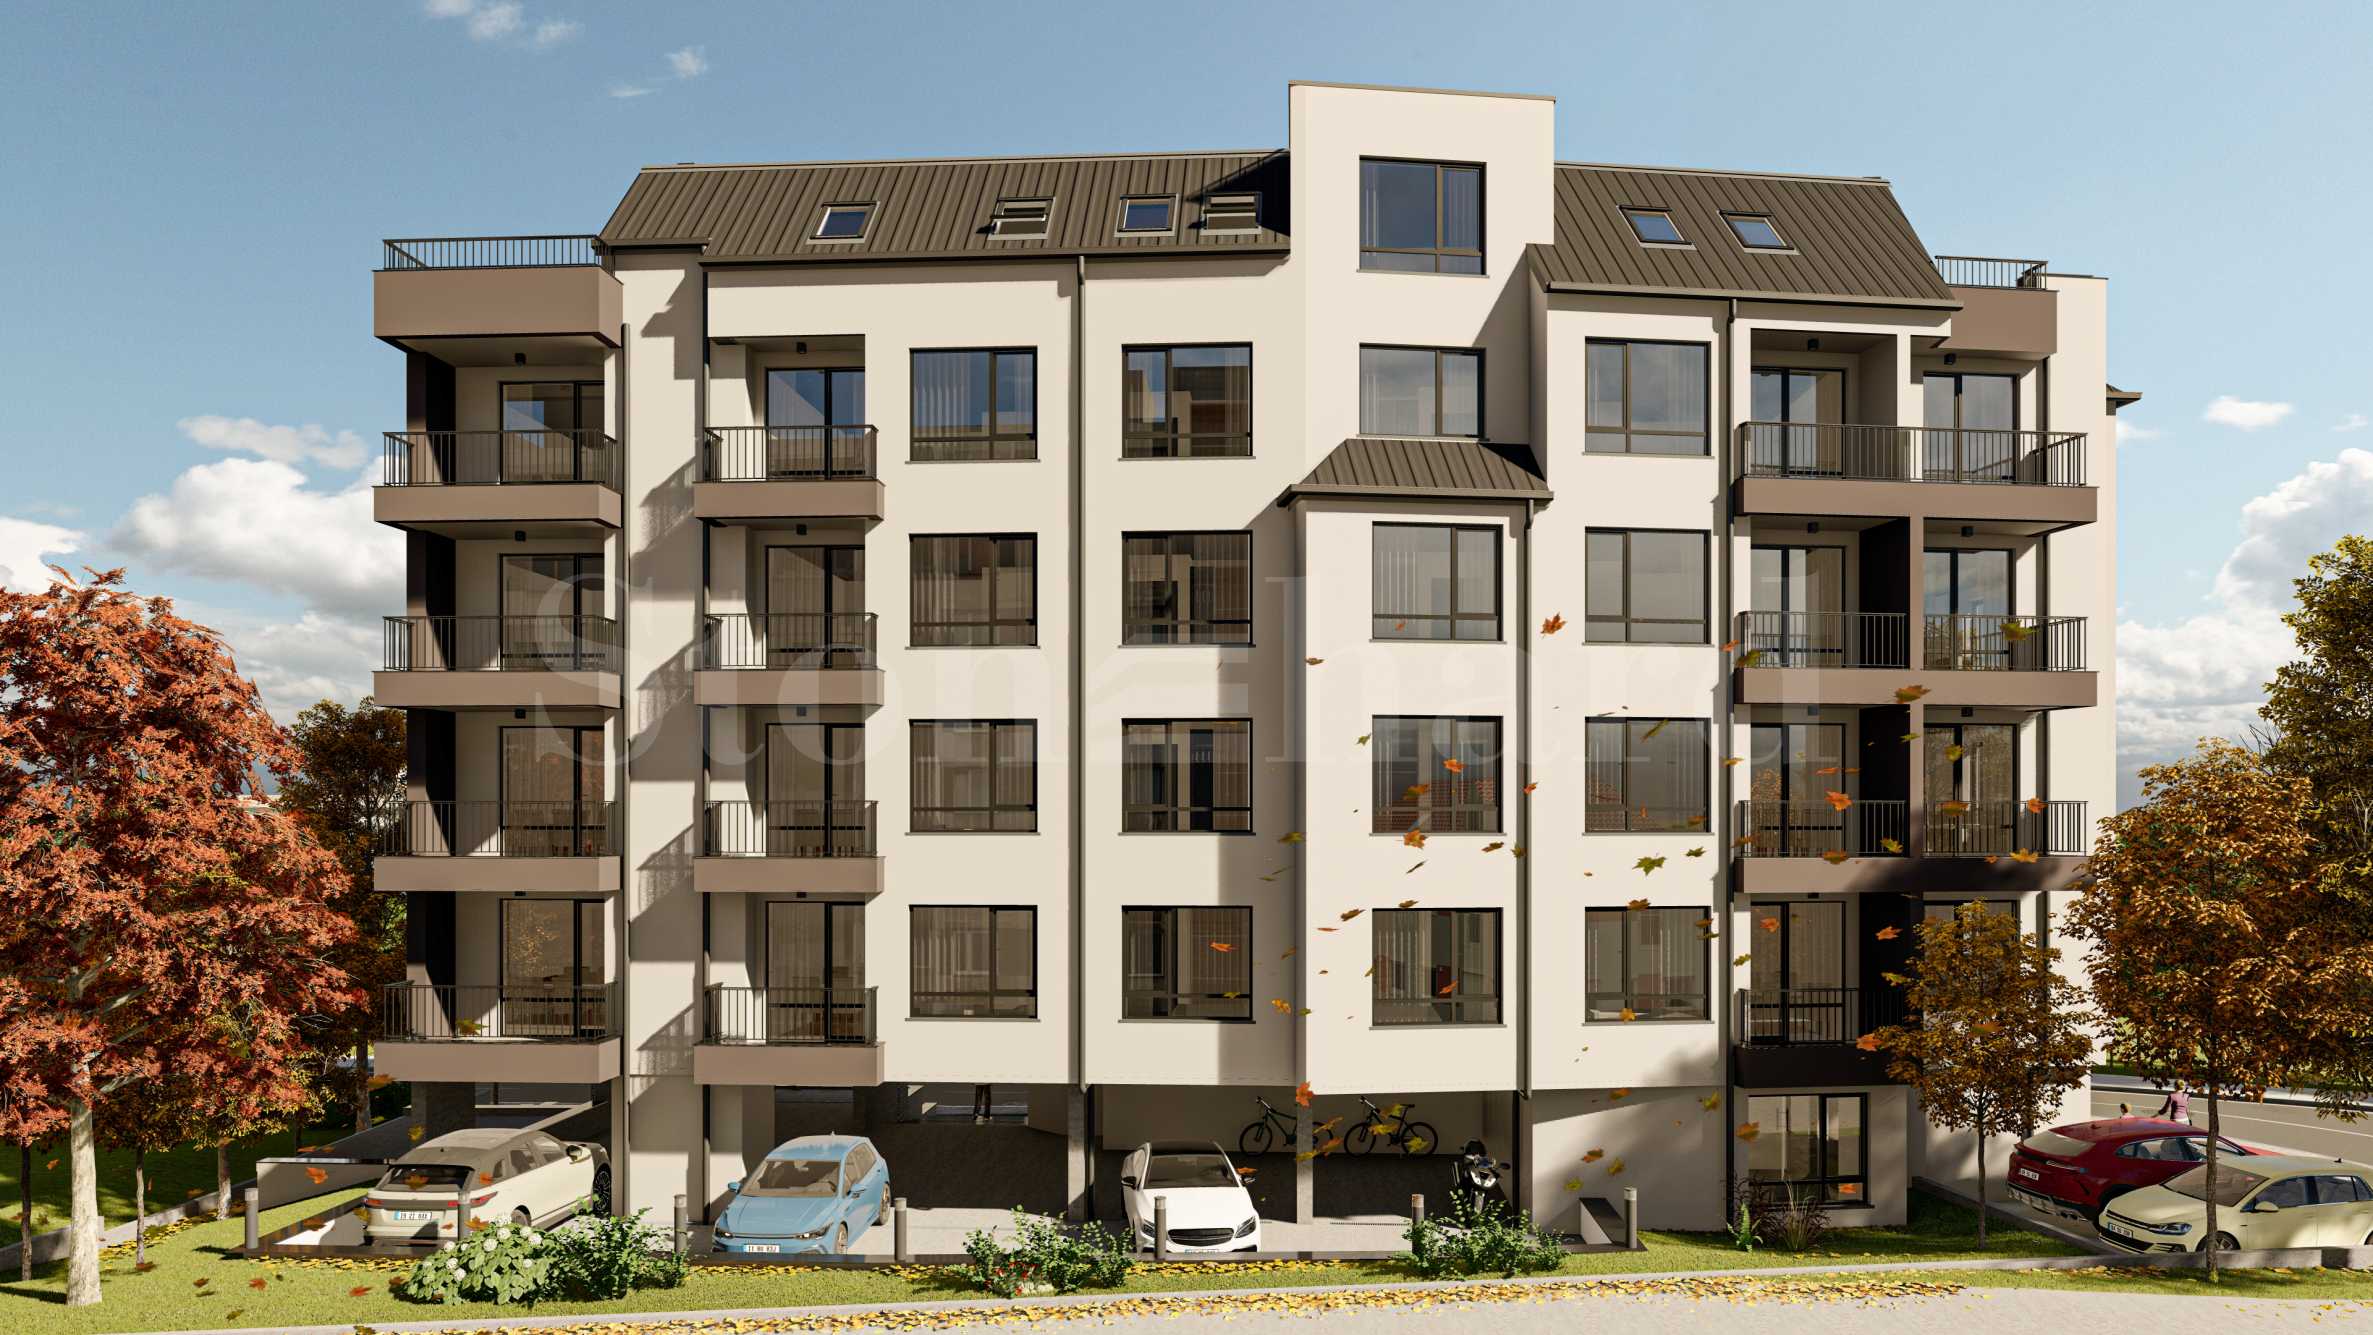 Apartments in a new residential building in a convenient area1 - Stonehard